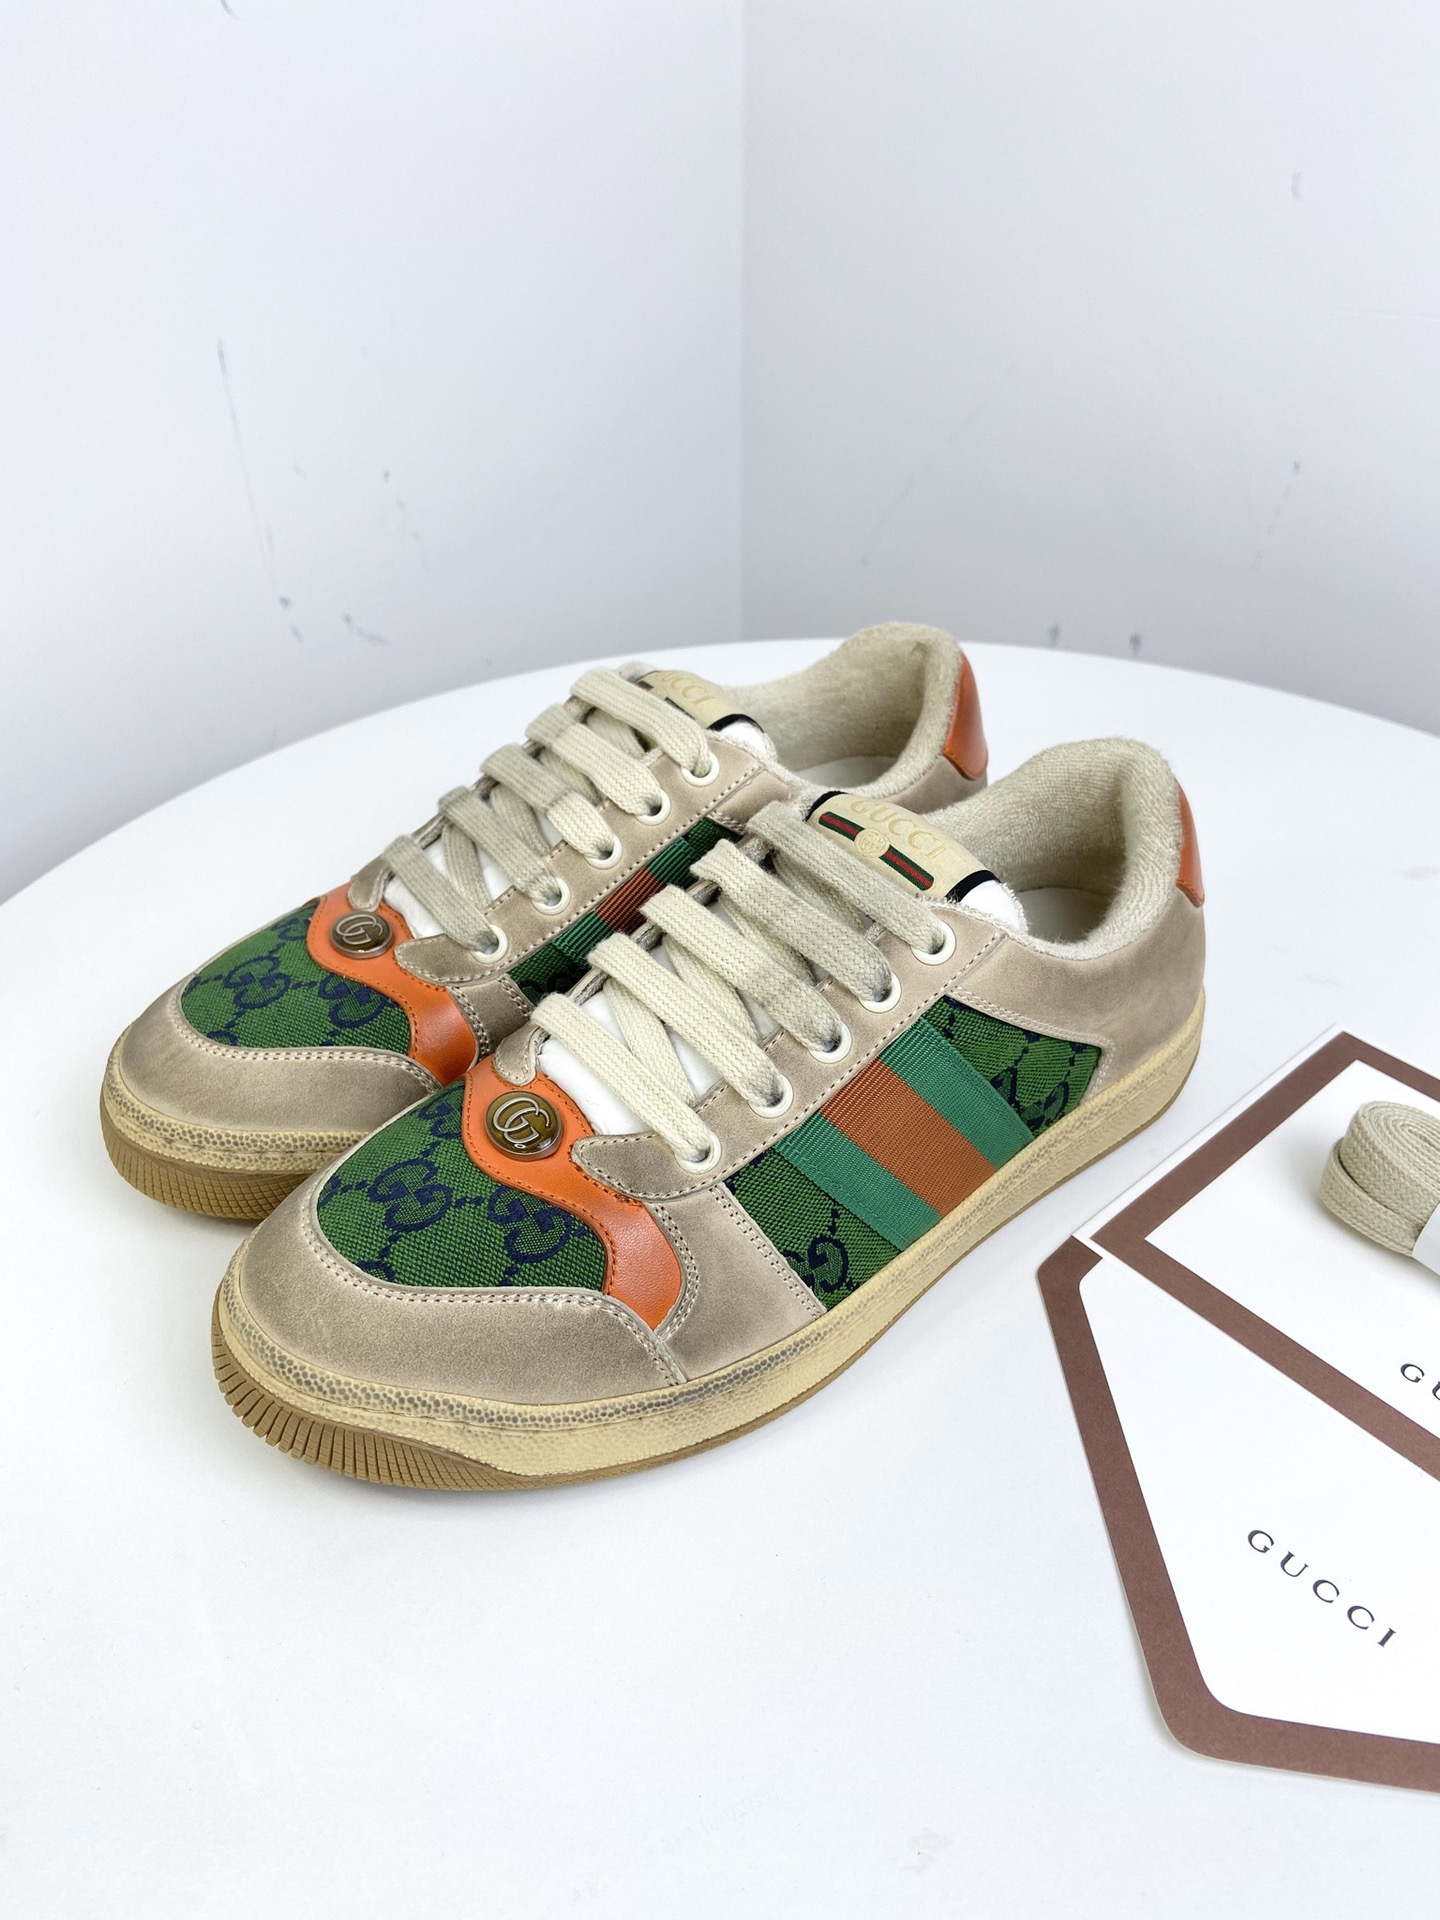 Gucci Skateboard Shoes Splicing Unisex Cowhide TPU Spring Collection Fashion Casual